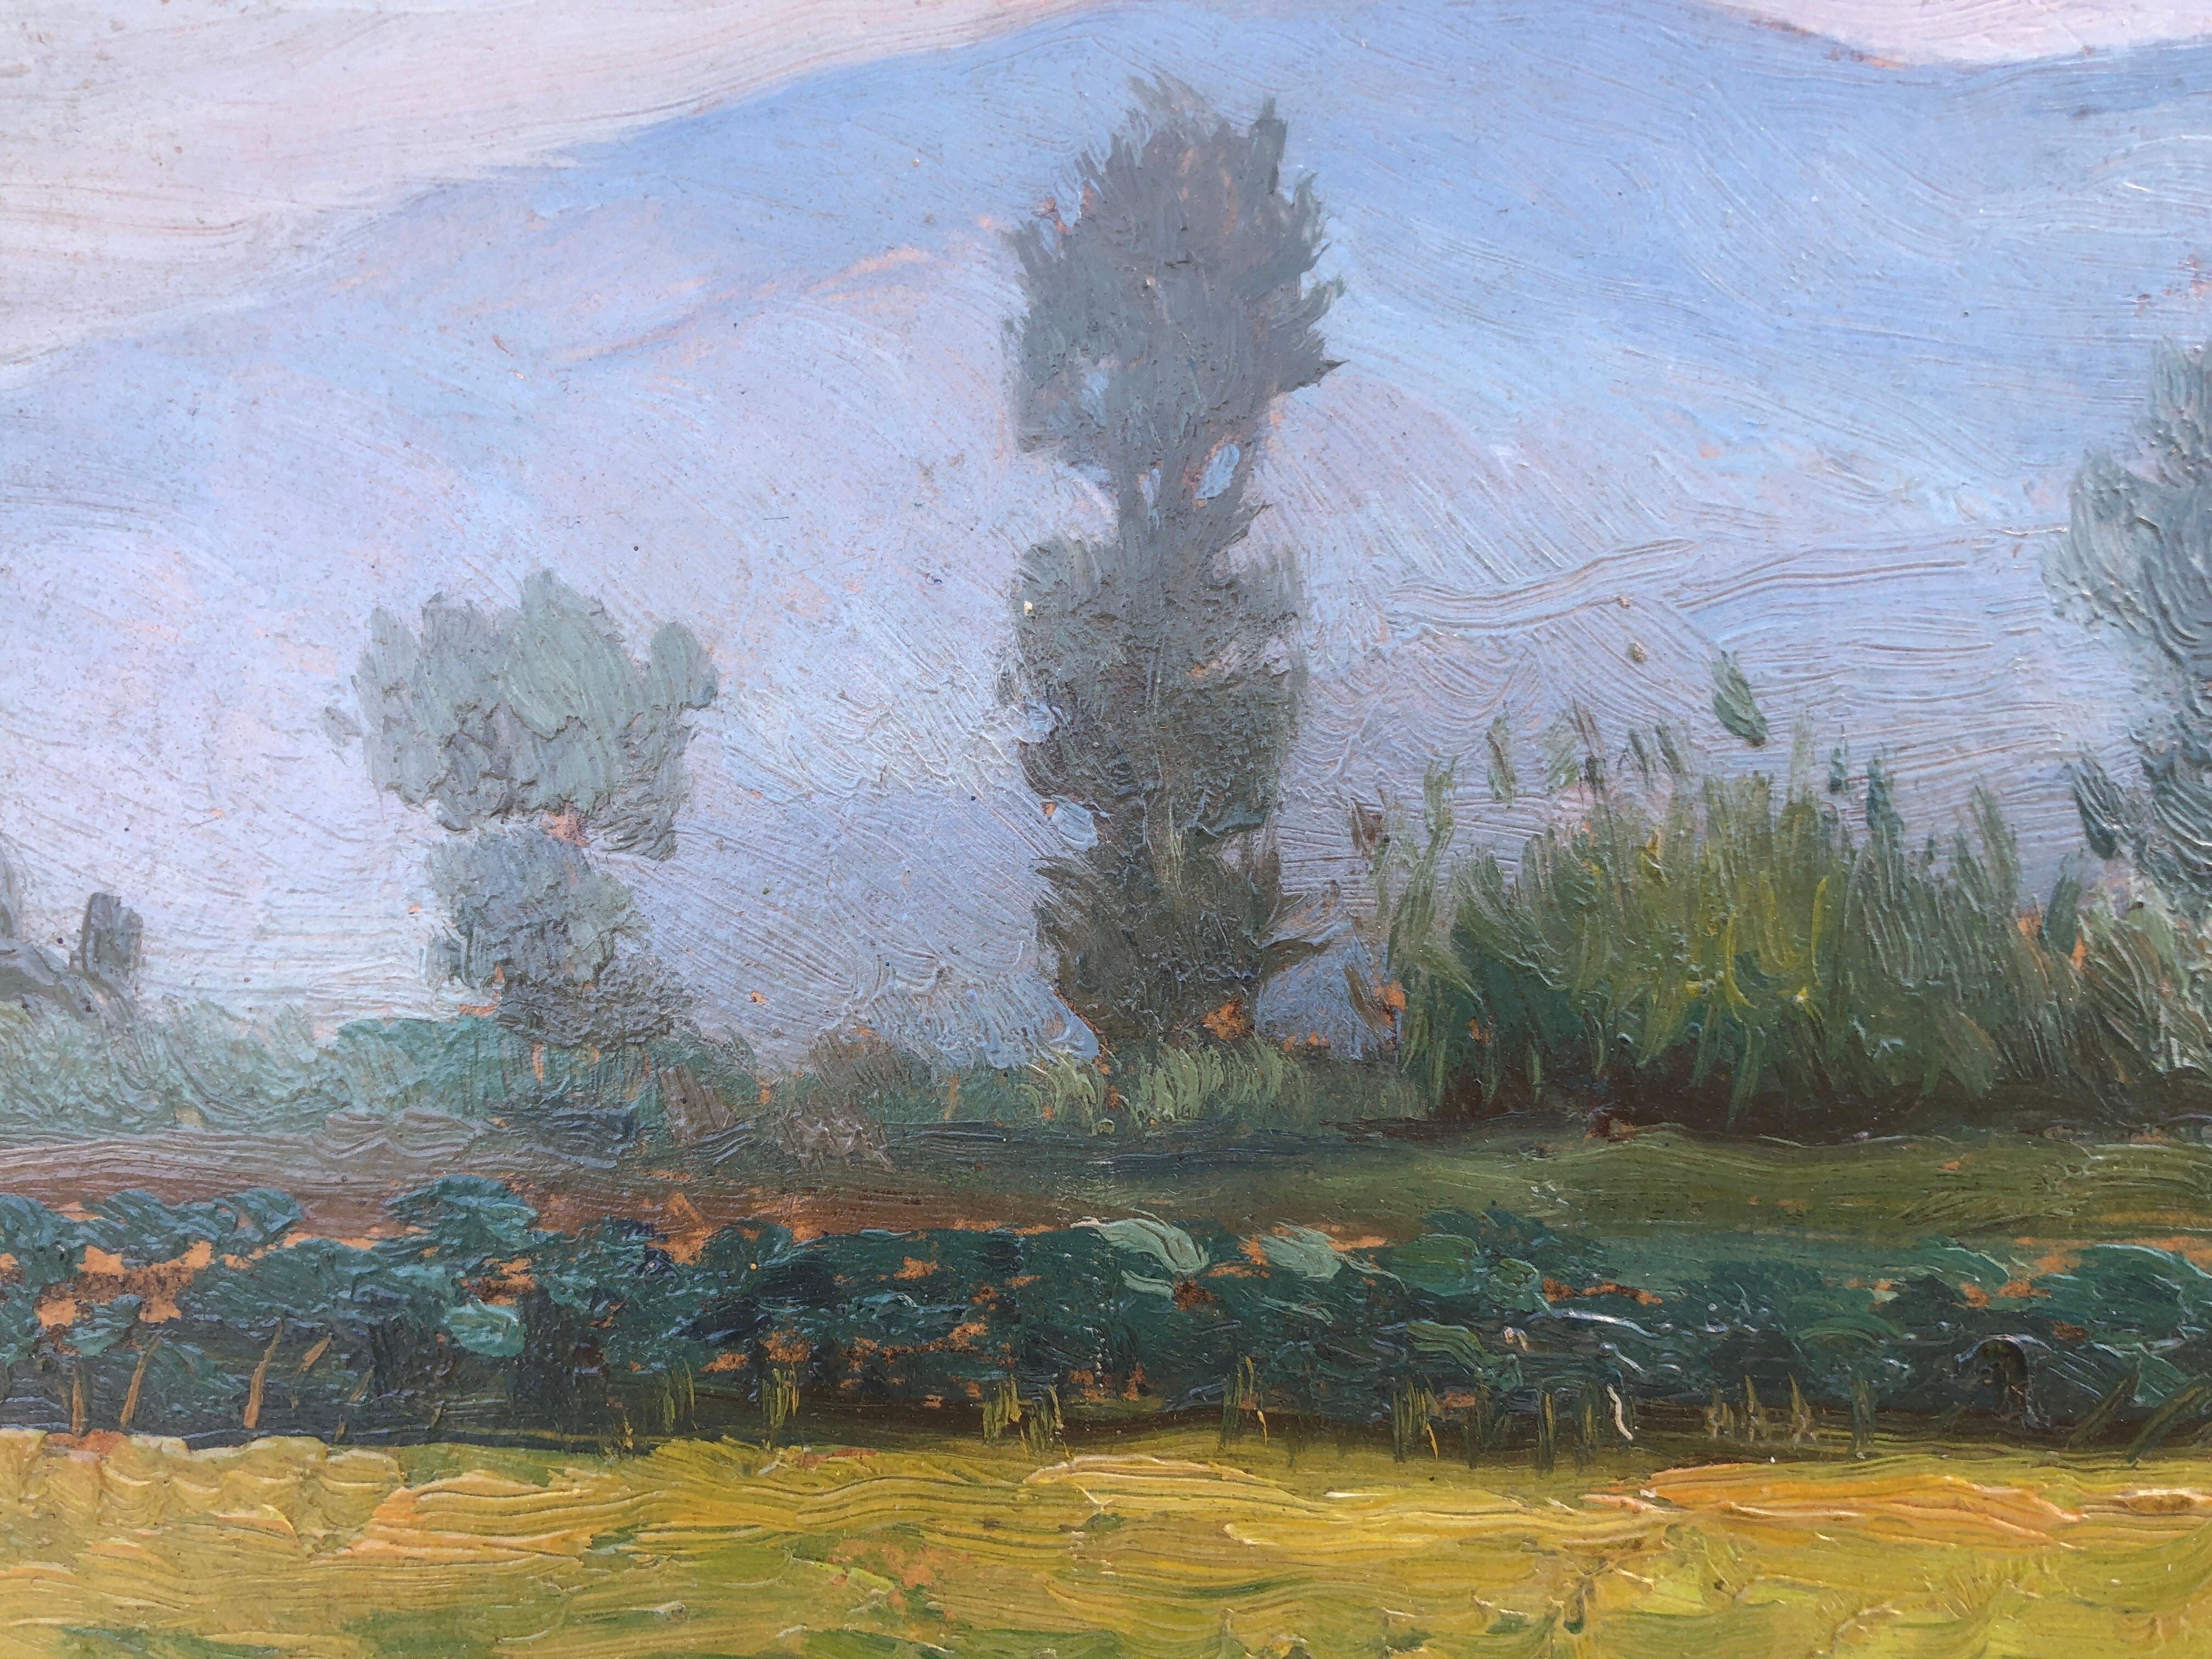 Albert Rafols Cullerés (1892-1986) - Landscape of Mollet - Oil on cardboard
Oil measures 25x32 cm.
Frameless.

Catalan painter formed the Llotja with Lluis Labarta and Arcadi Más and fontdevila and pensioner in Madrid.

He exhibited individually in